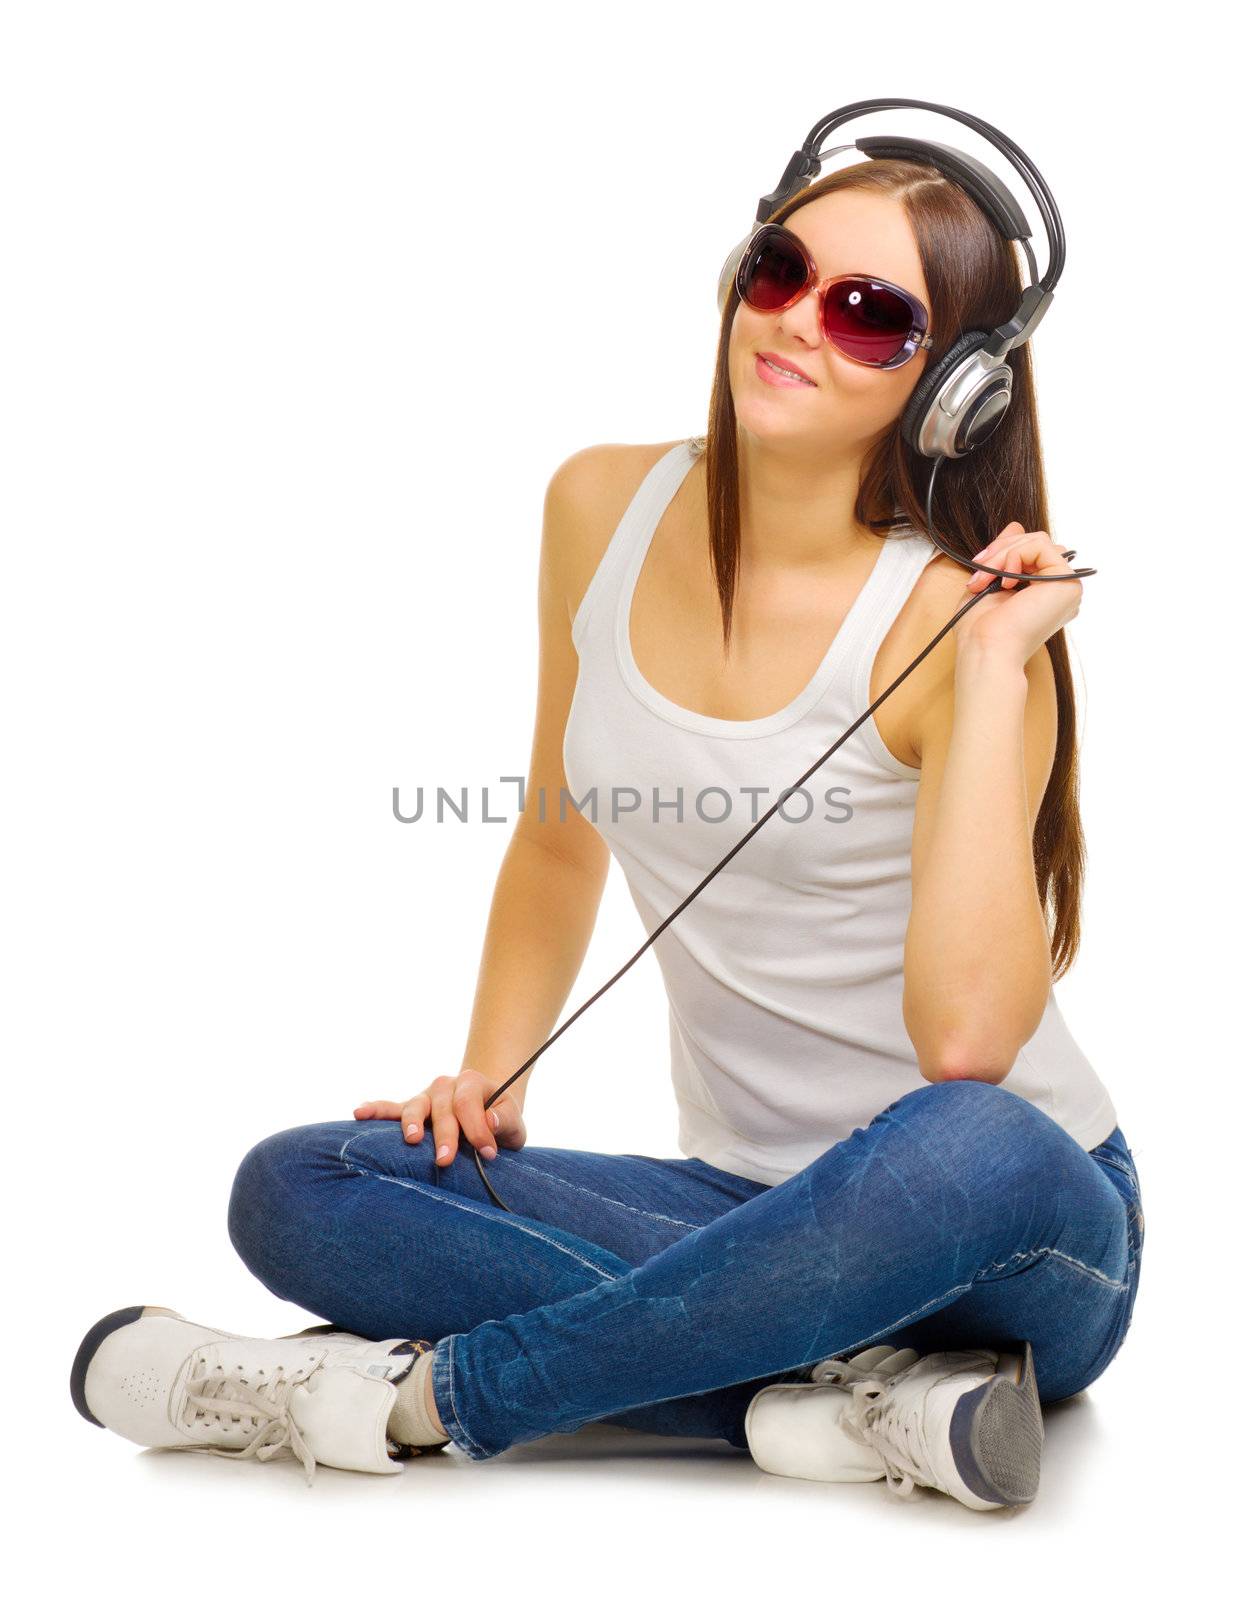 Girl with headphones by rbv